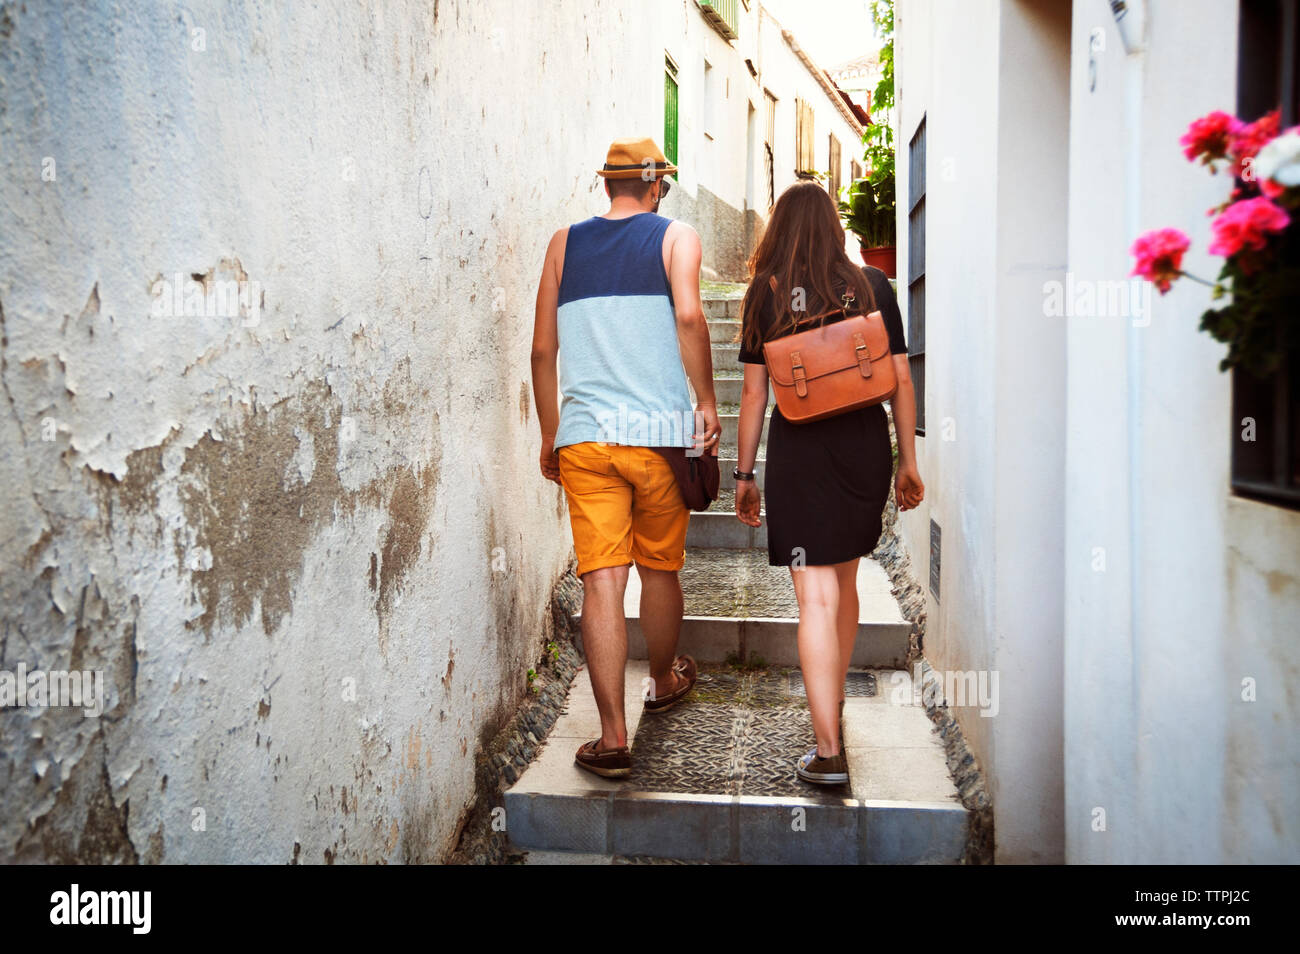 Rear view of couple climbing staircase amidst buildings Stock Photo